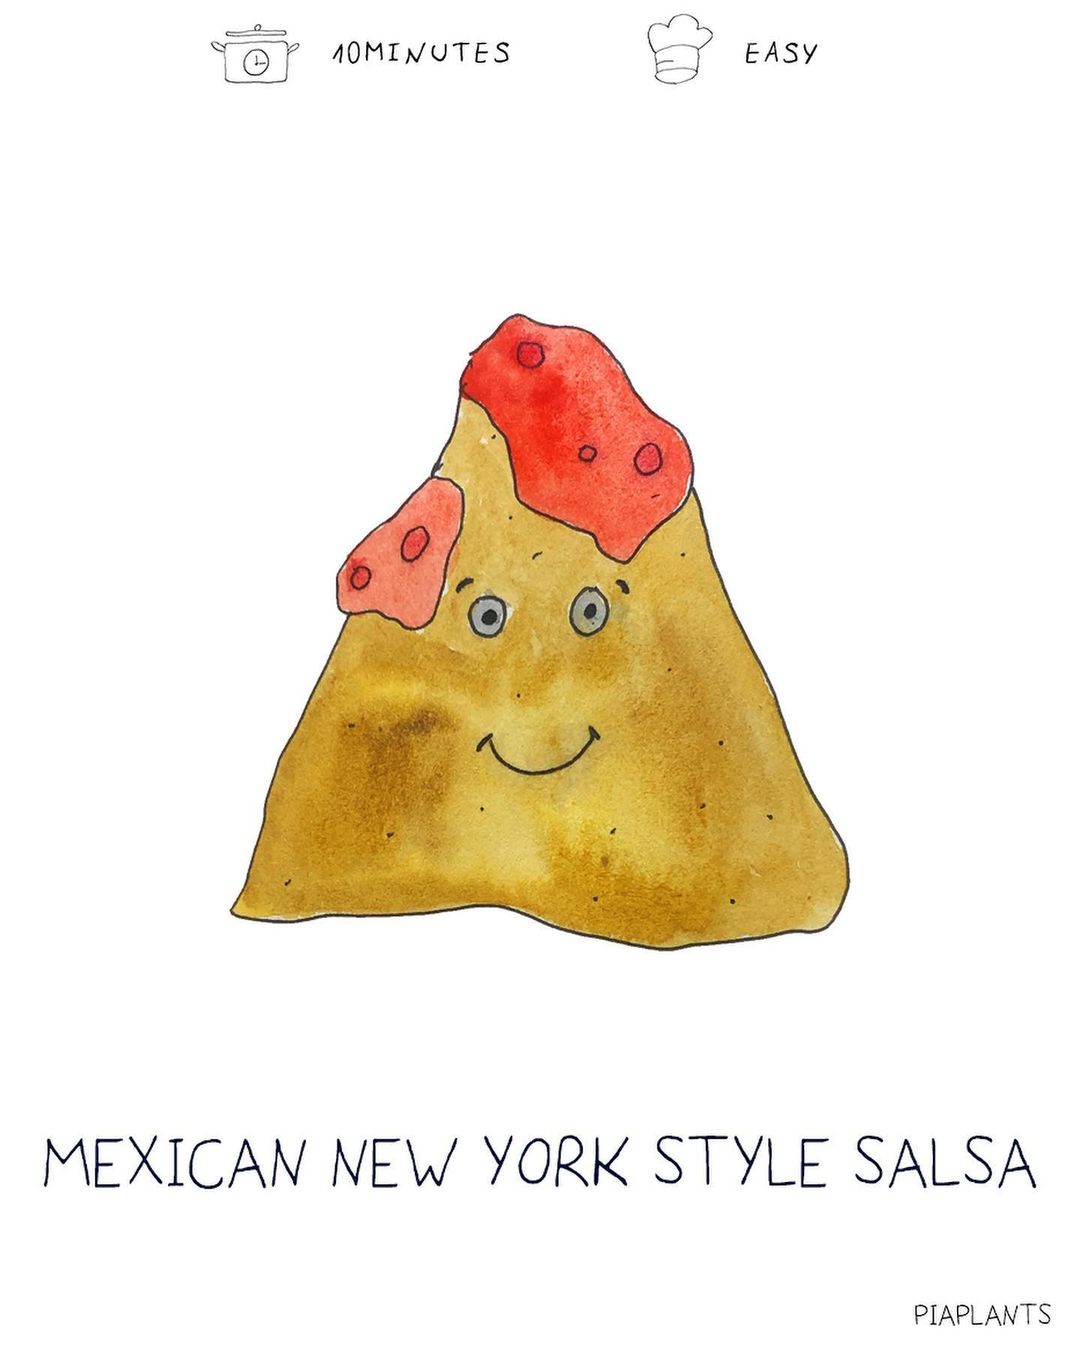 Mexican New York Style Salsa